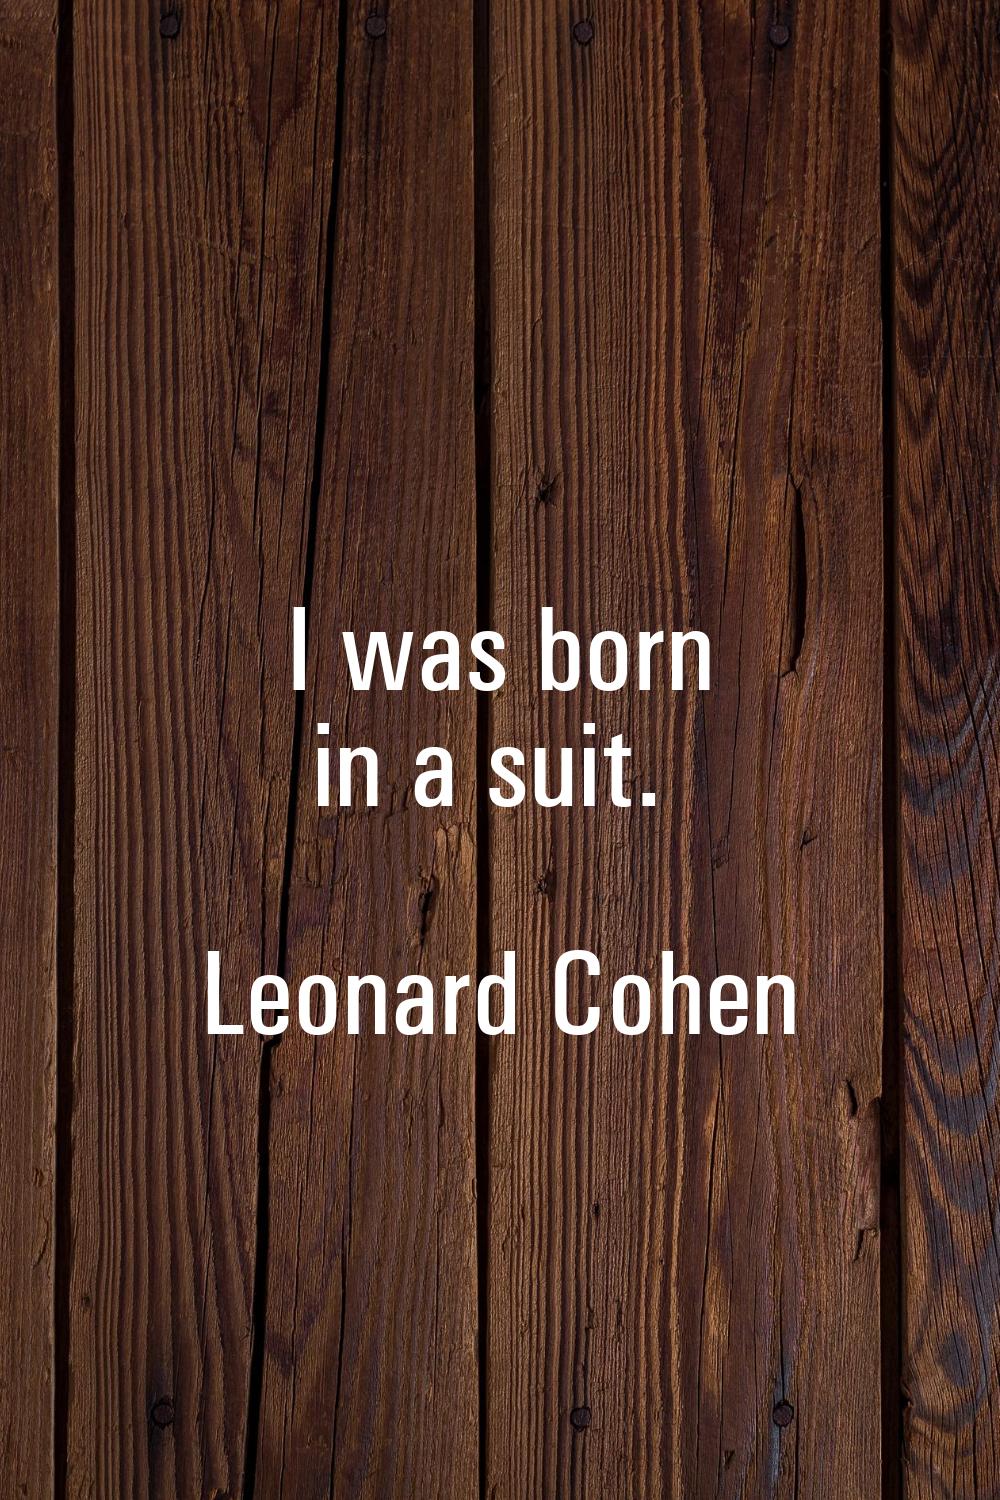 I was born in a suit.